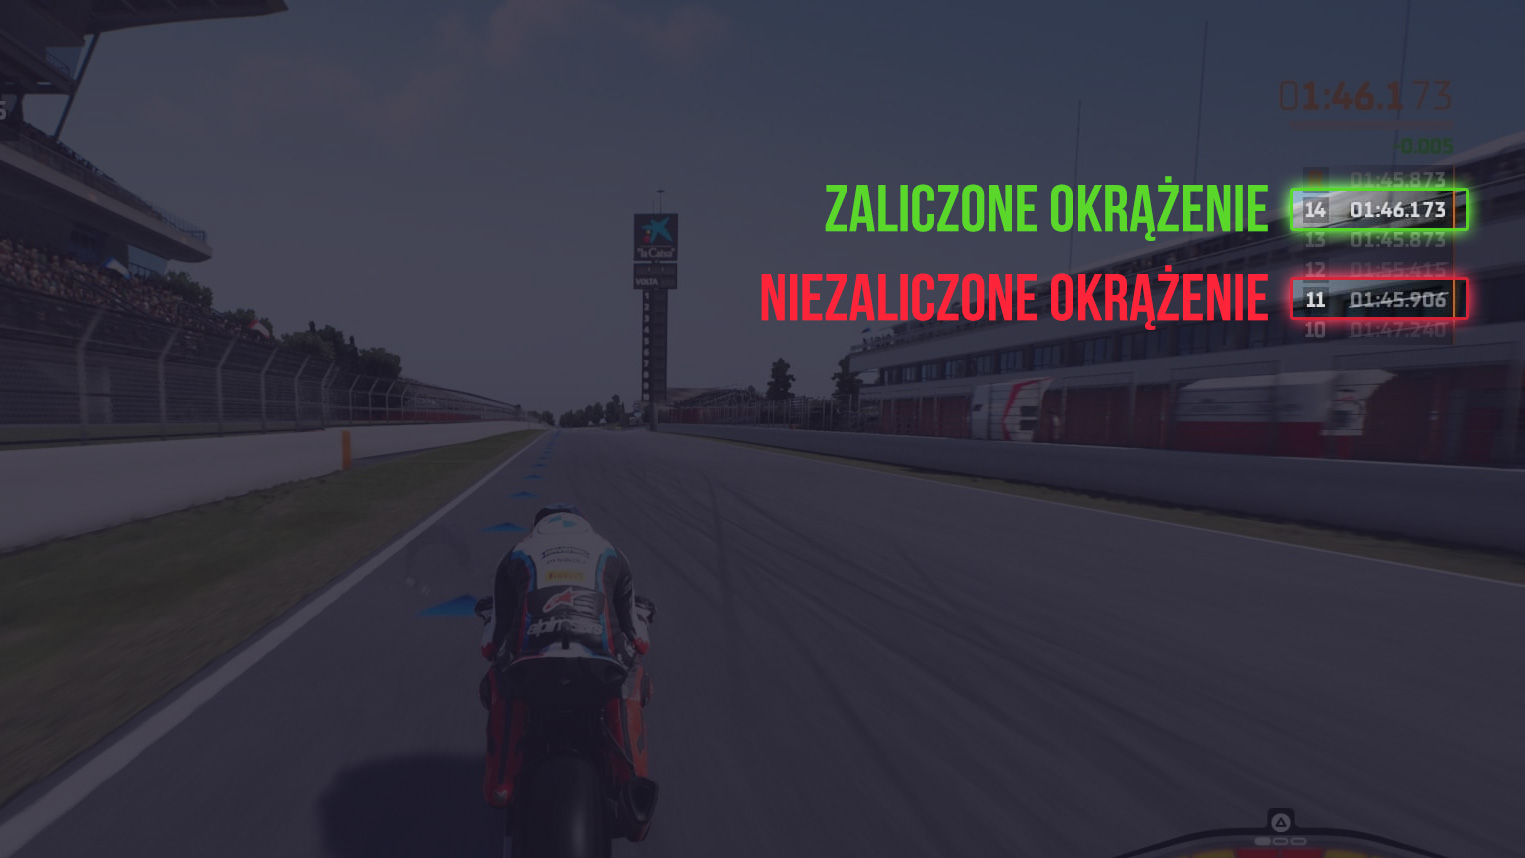 SBK 22 - time trial